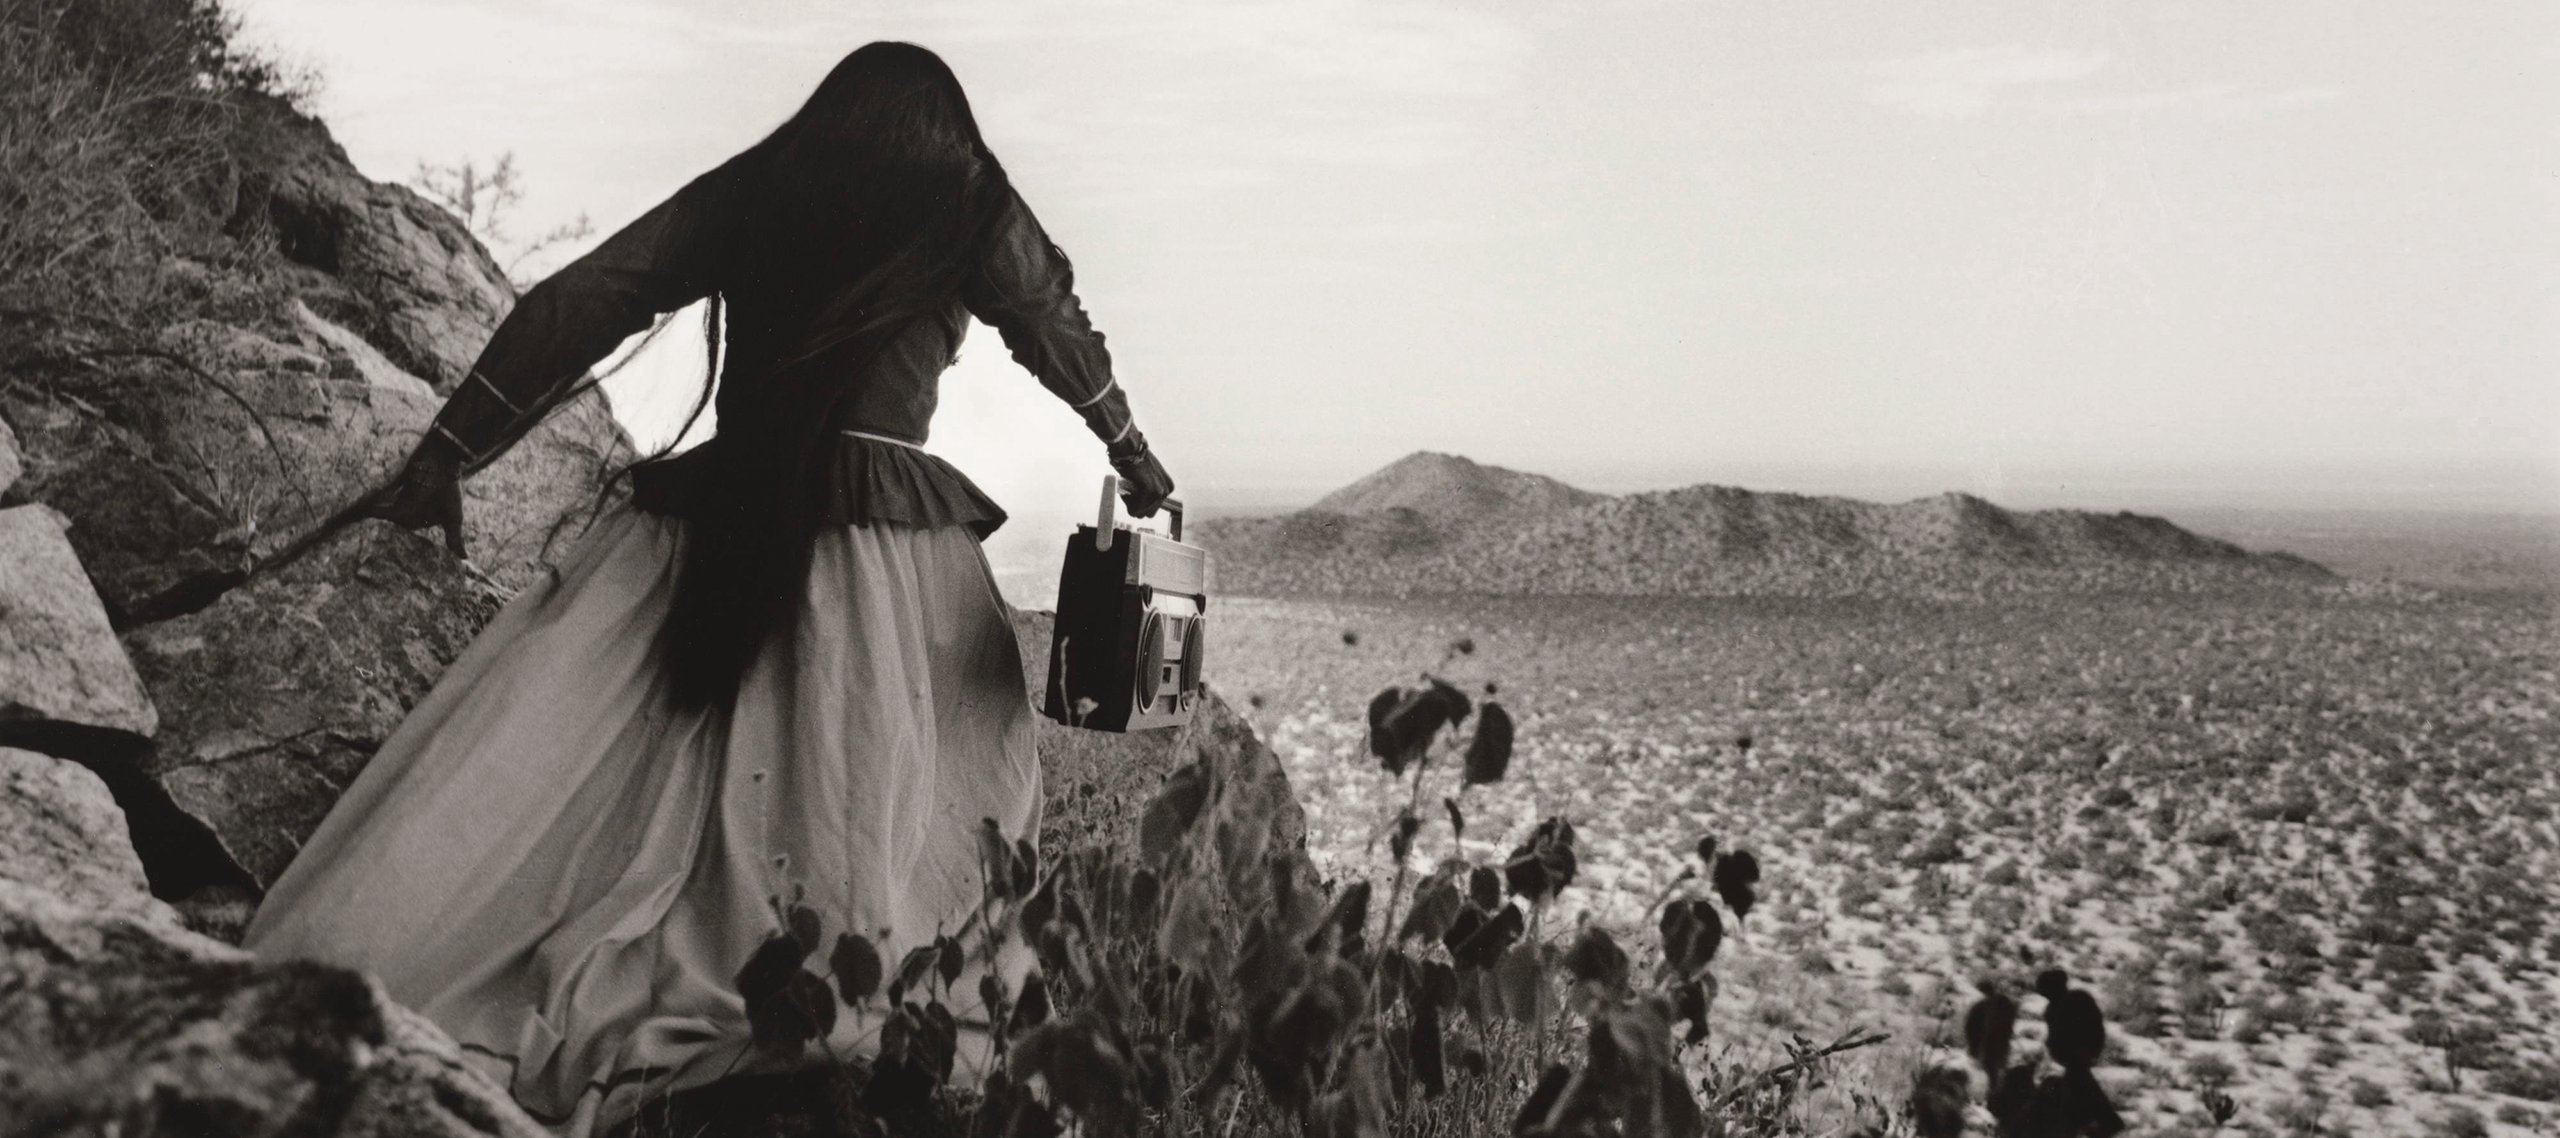 A black-and-white photograph shows the back of a woman as she crests a rocky path above a vast desert landscape beneath an expansive sky. Her traditional, ethnic full skirt, long-sleeved blouse, and long, straight, dark hair contrasts with the modern portable stereo she carries.